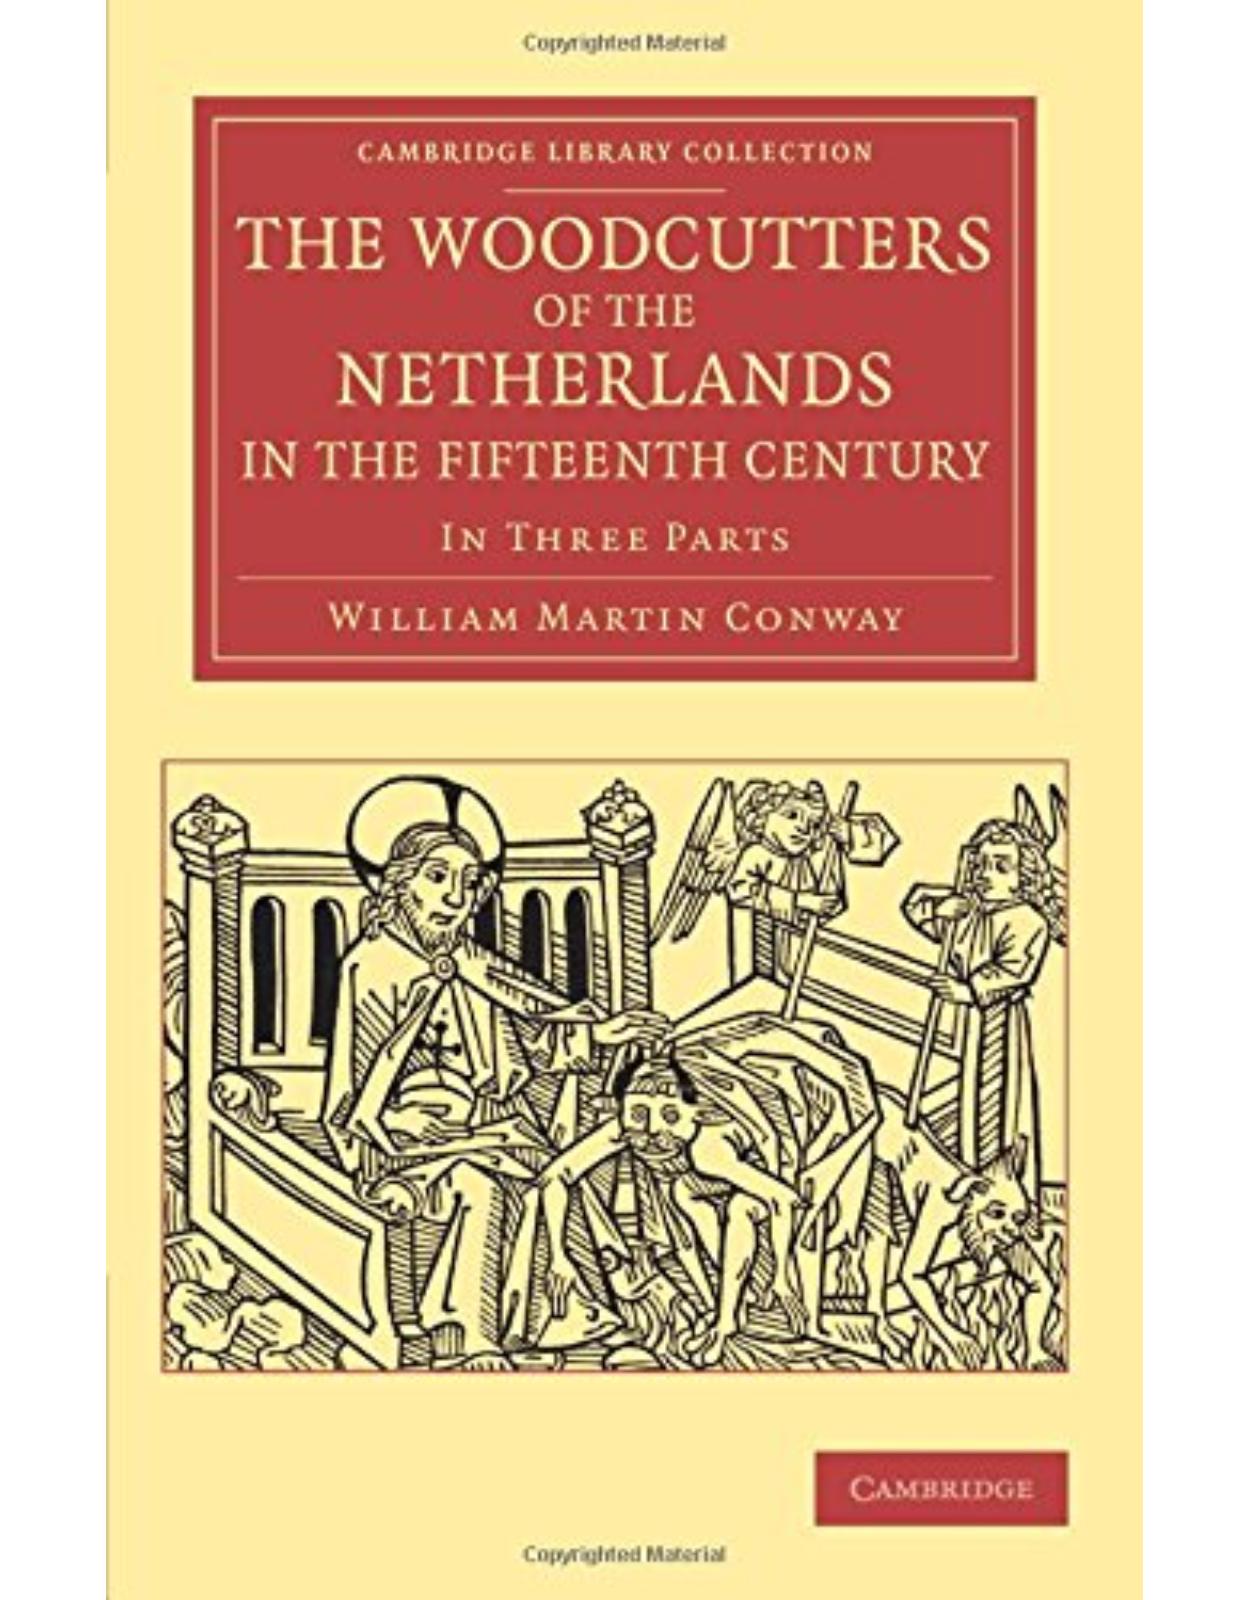 The Woodcutters of the Netherlands in the Fifteenth Century: In Three Parts (Cambridge Library Collection - Art and Architecture)